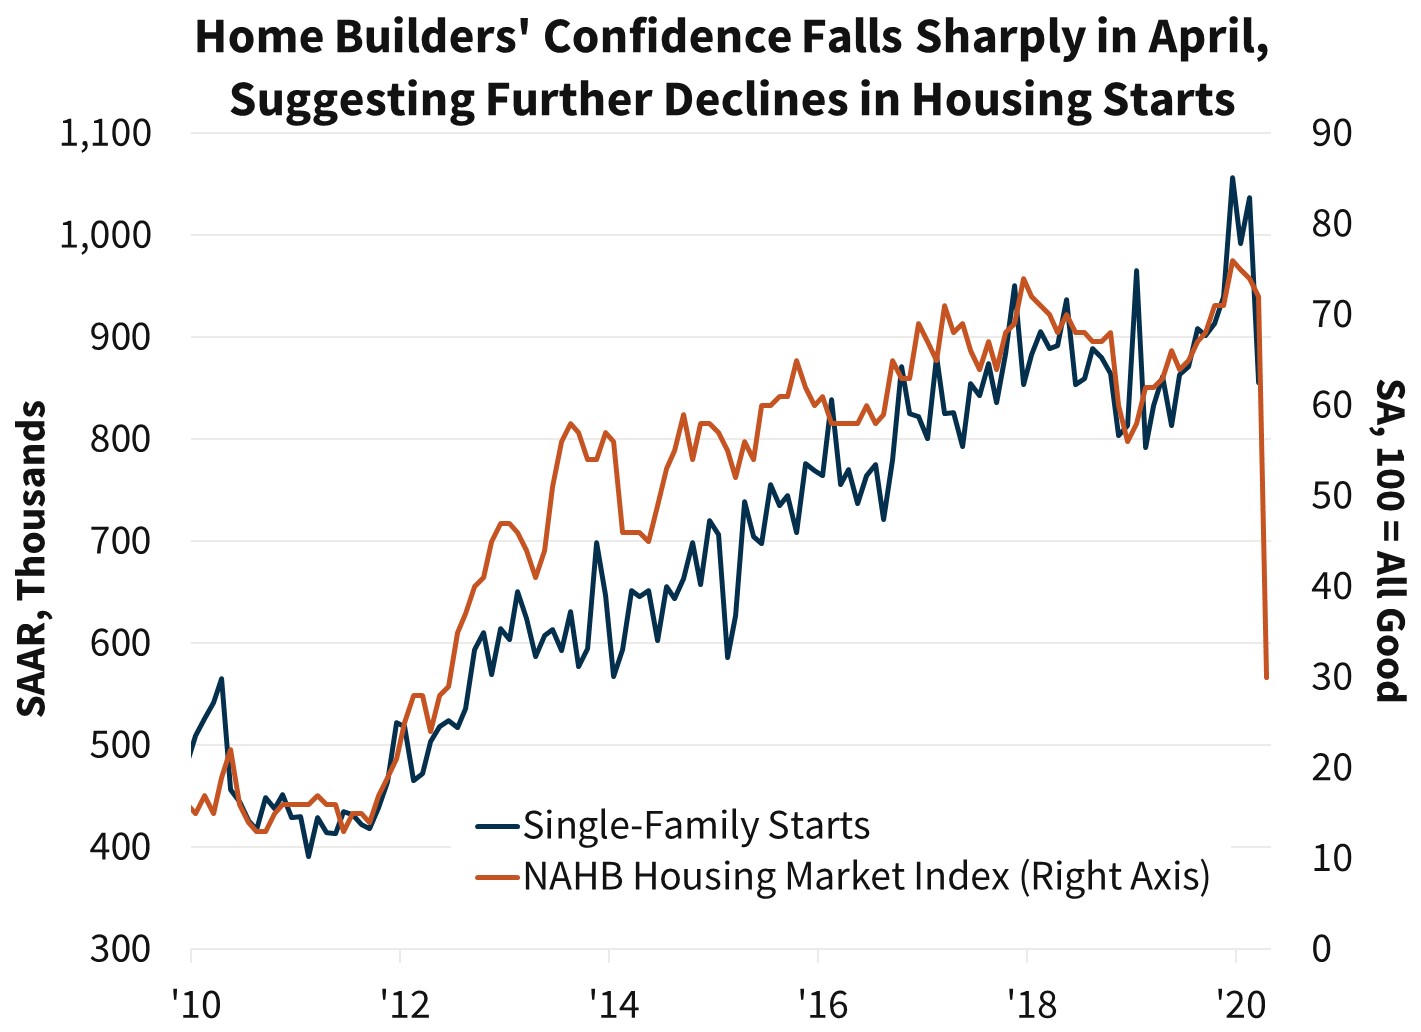  Home Builders’ Confidence Falls Sharply in April Suggesting Further Decline in Housing Starts 